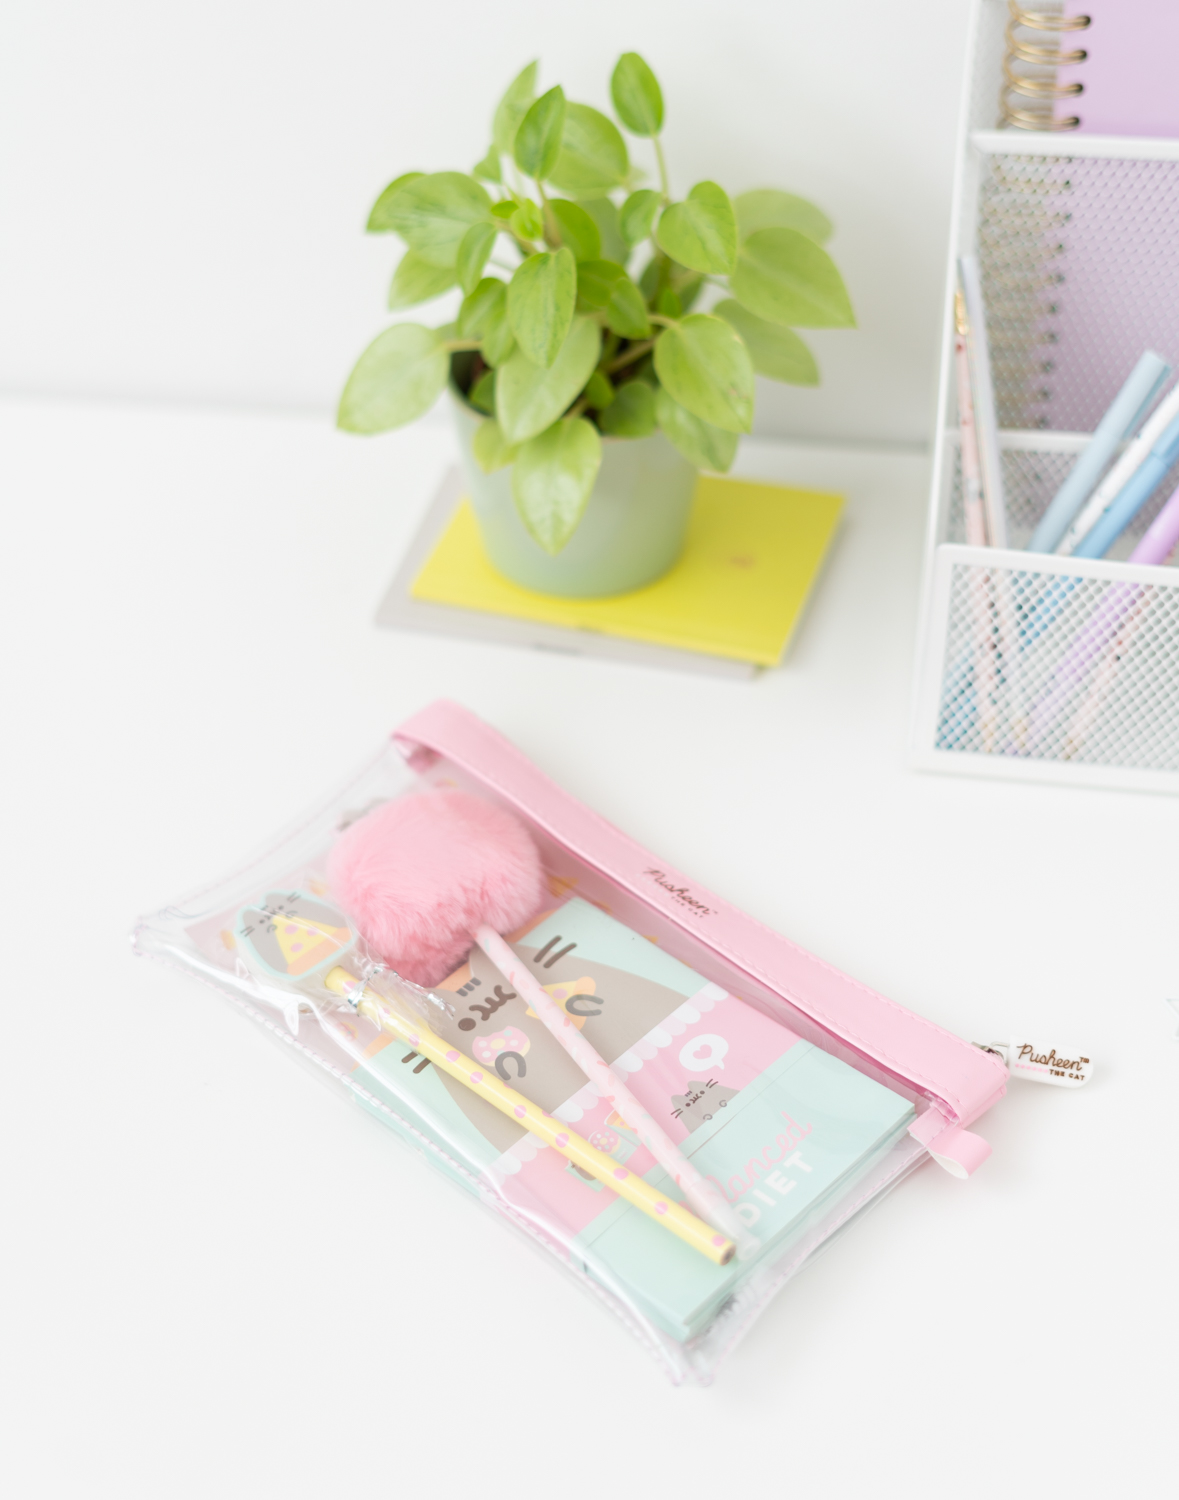 Pusheen Foodie Collection Writing Set Multicolor